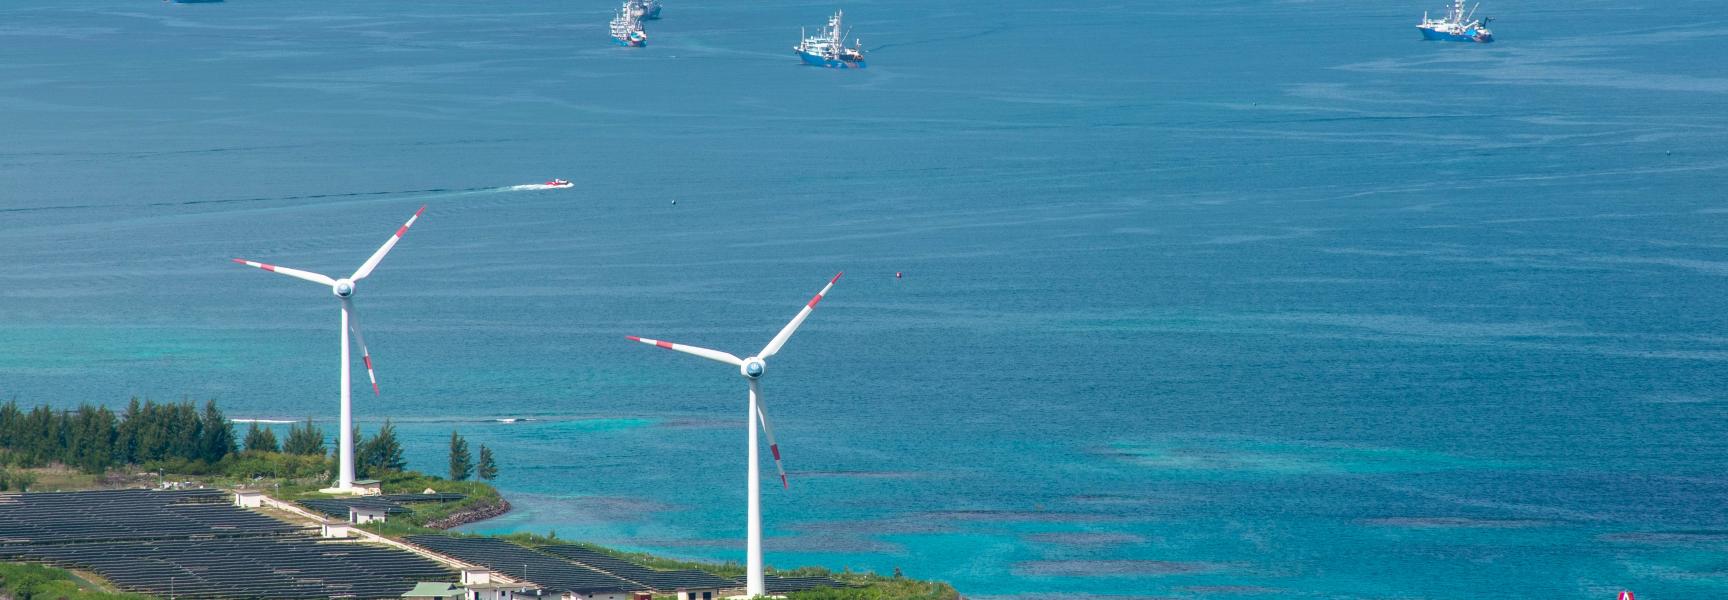 Offshore wind farm in the Seychelles